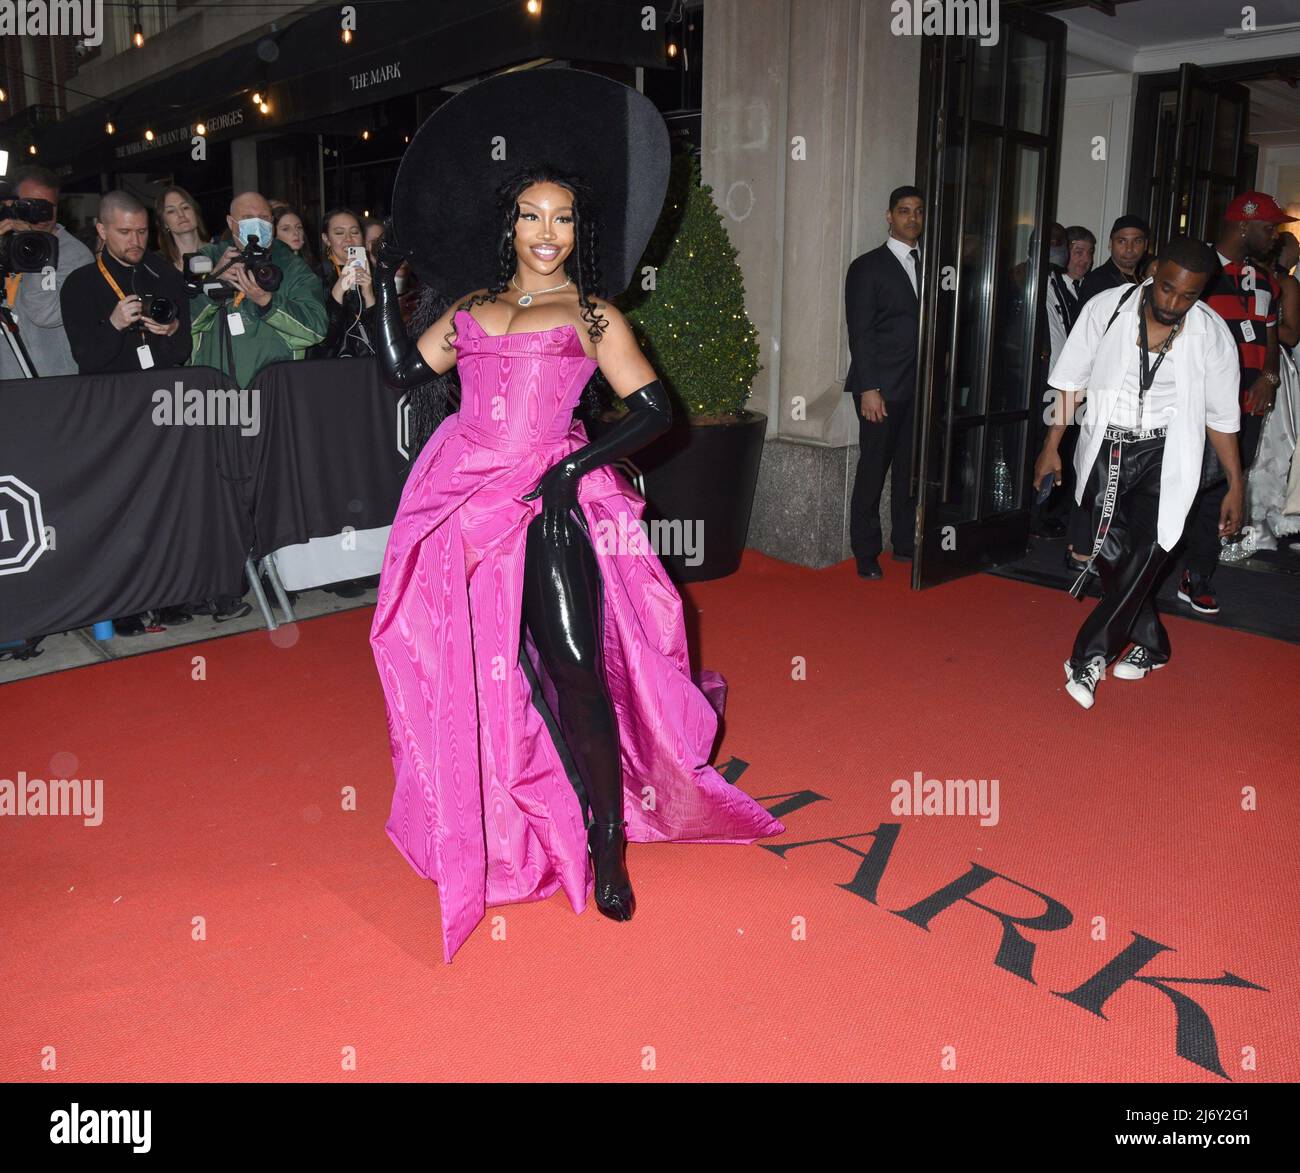 Gemma Chan at departures for Celebrity Candids - Departing for the Met Gala,  The Mark Hotel, New York, NY May 2, 2022. Photo By: Quoin Pics/Everett  Collection Stock Photo - Alamy